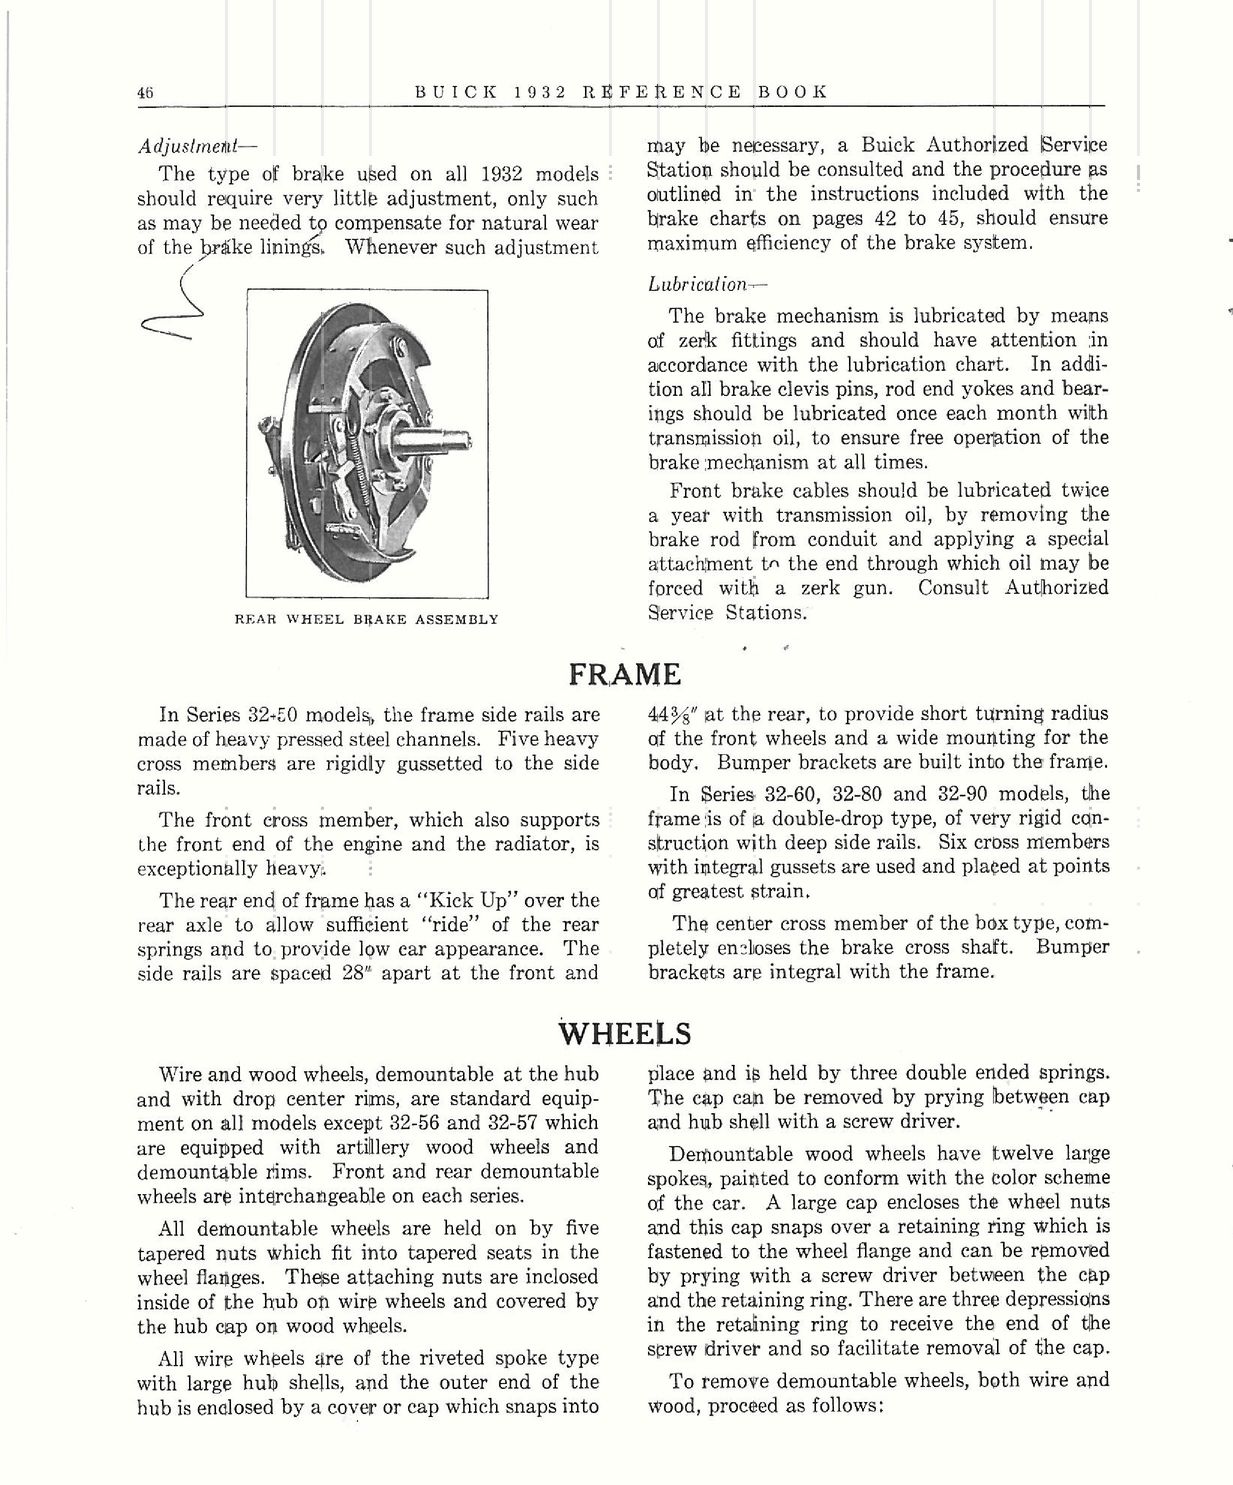 n_1932 Buick Reference Book-46.jpg